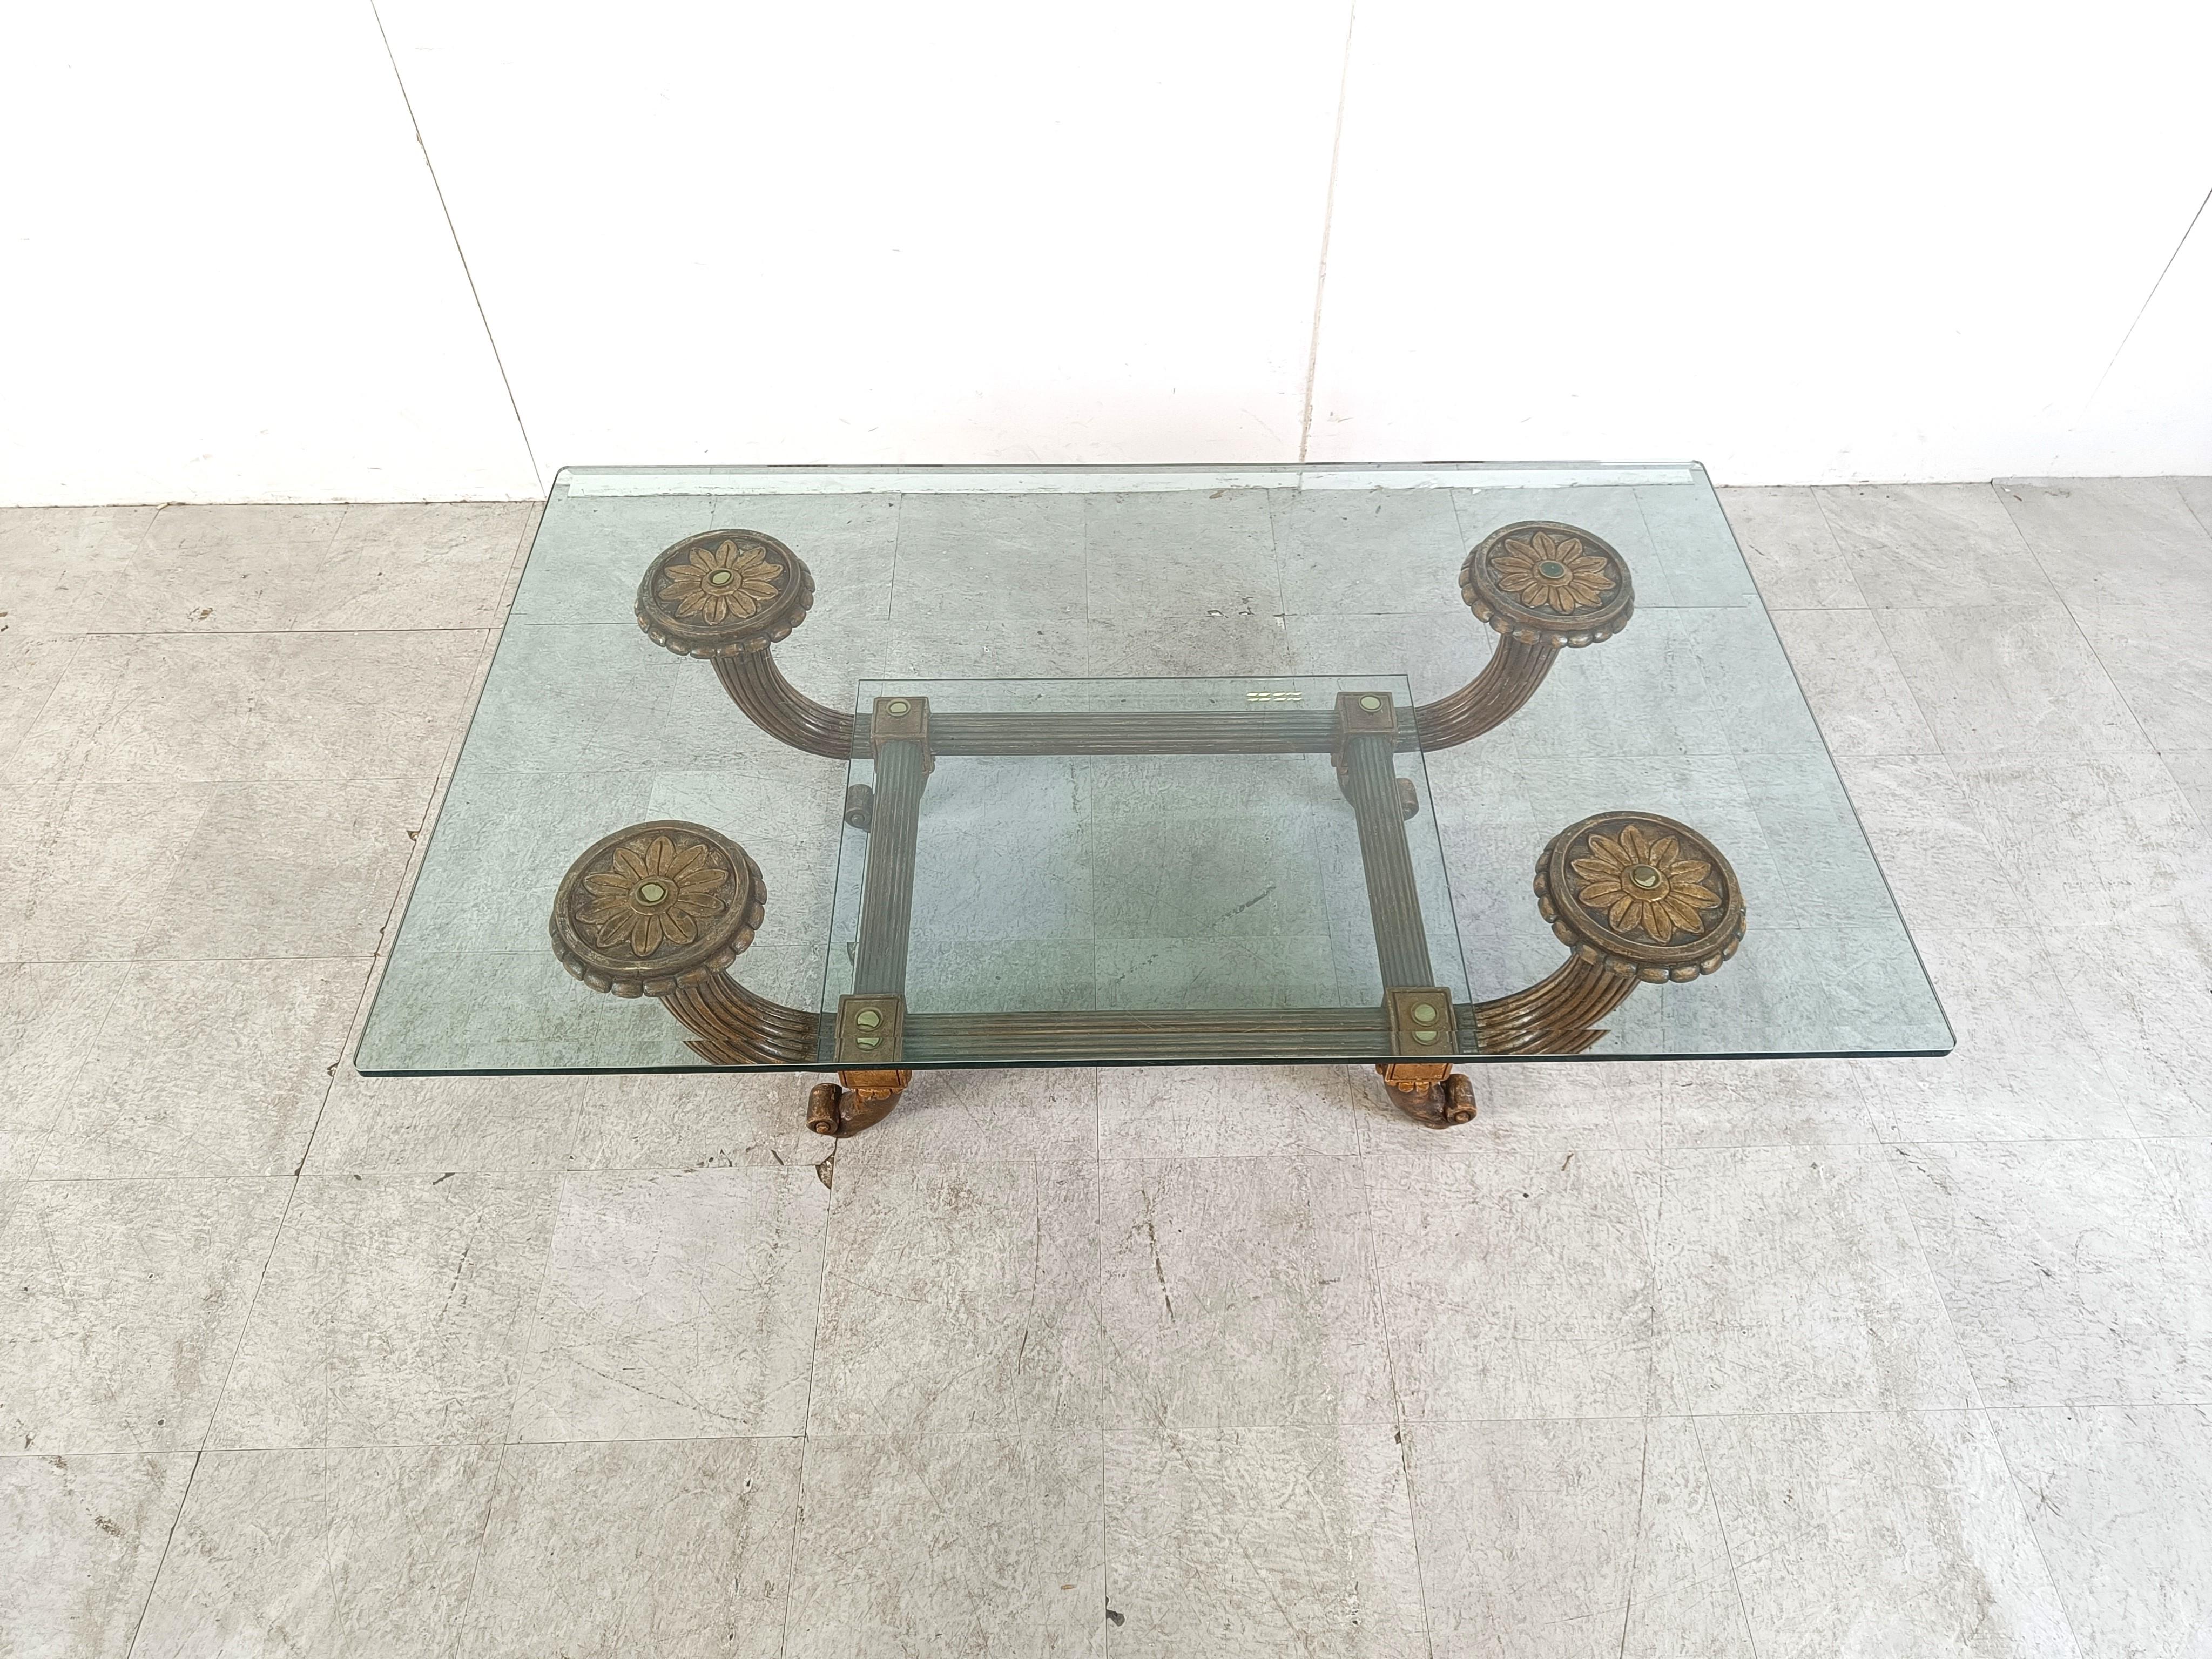 Mid century sculptural wooden coffee table in hollywood regency style. 

Resembles a lot the style of Vidal Grau.

Beautiful curled legs, beautiful reeded bentwooden arms supporting a clear glass top.

Stately coffee table with a luxurious appeal.